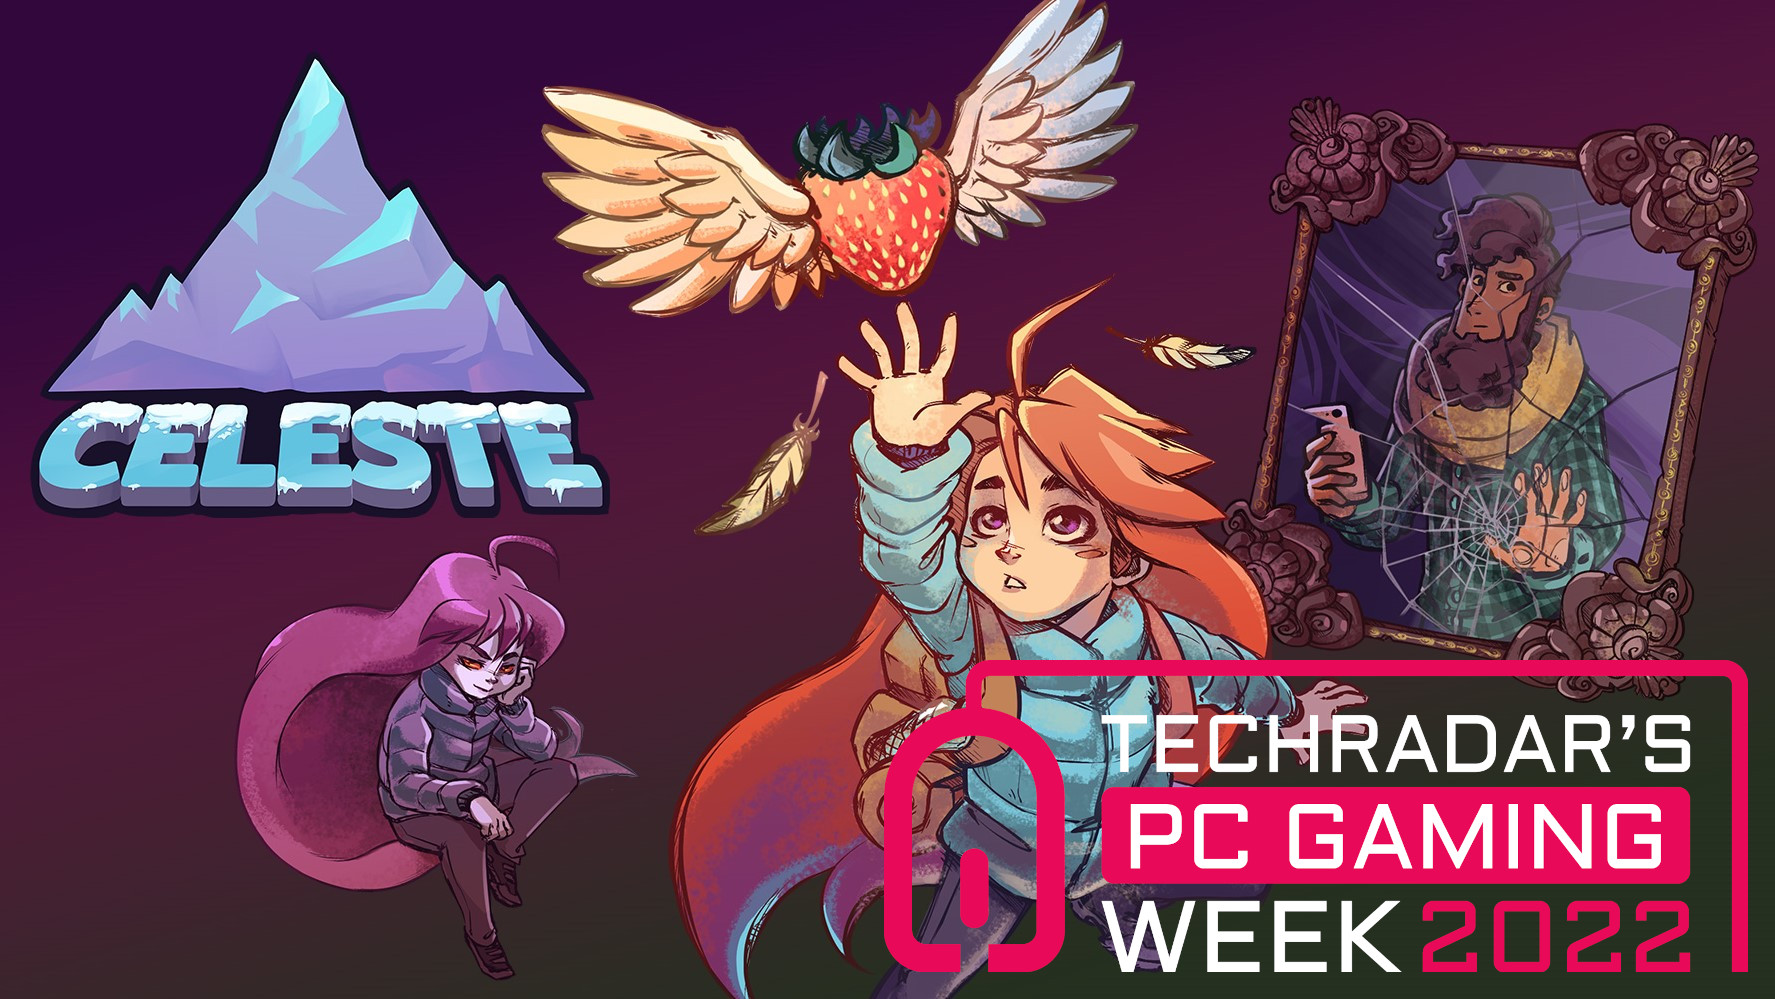 Promotional image for Celeste featuring Celeste and her shadow.